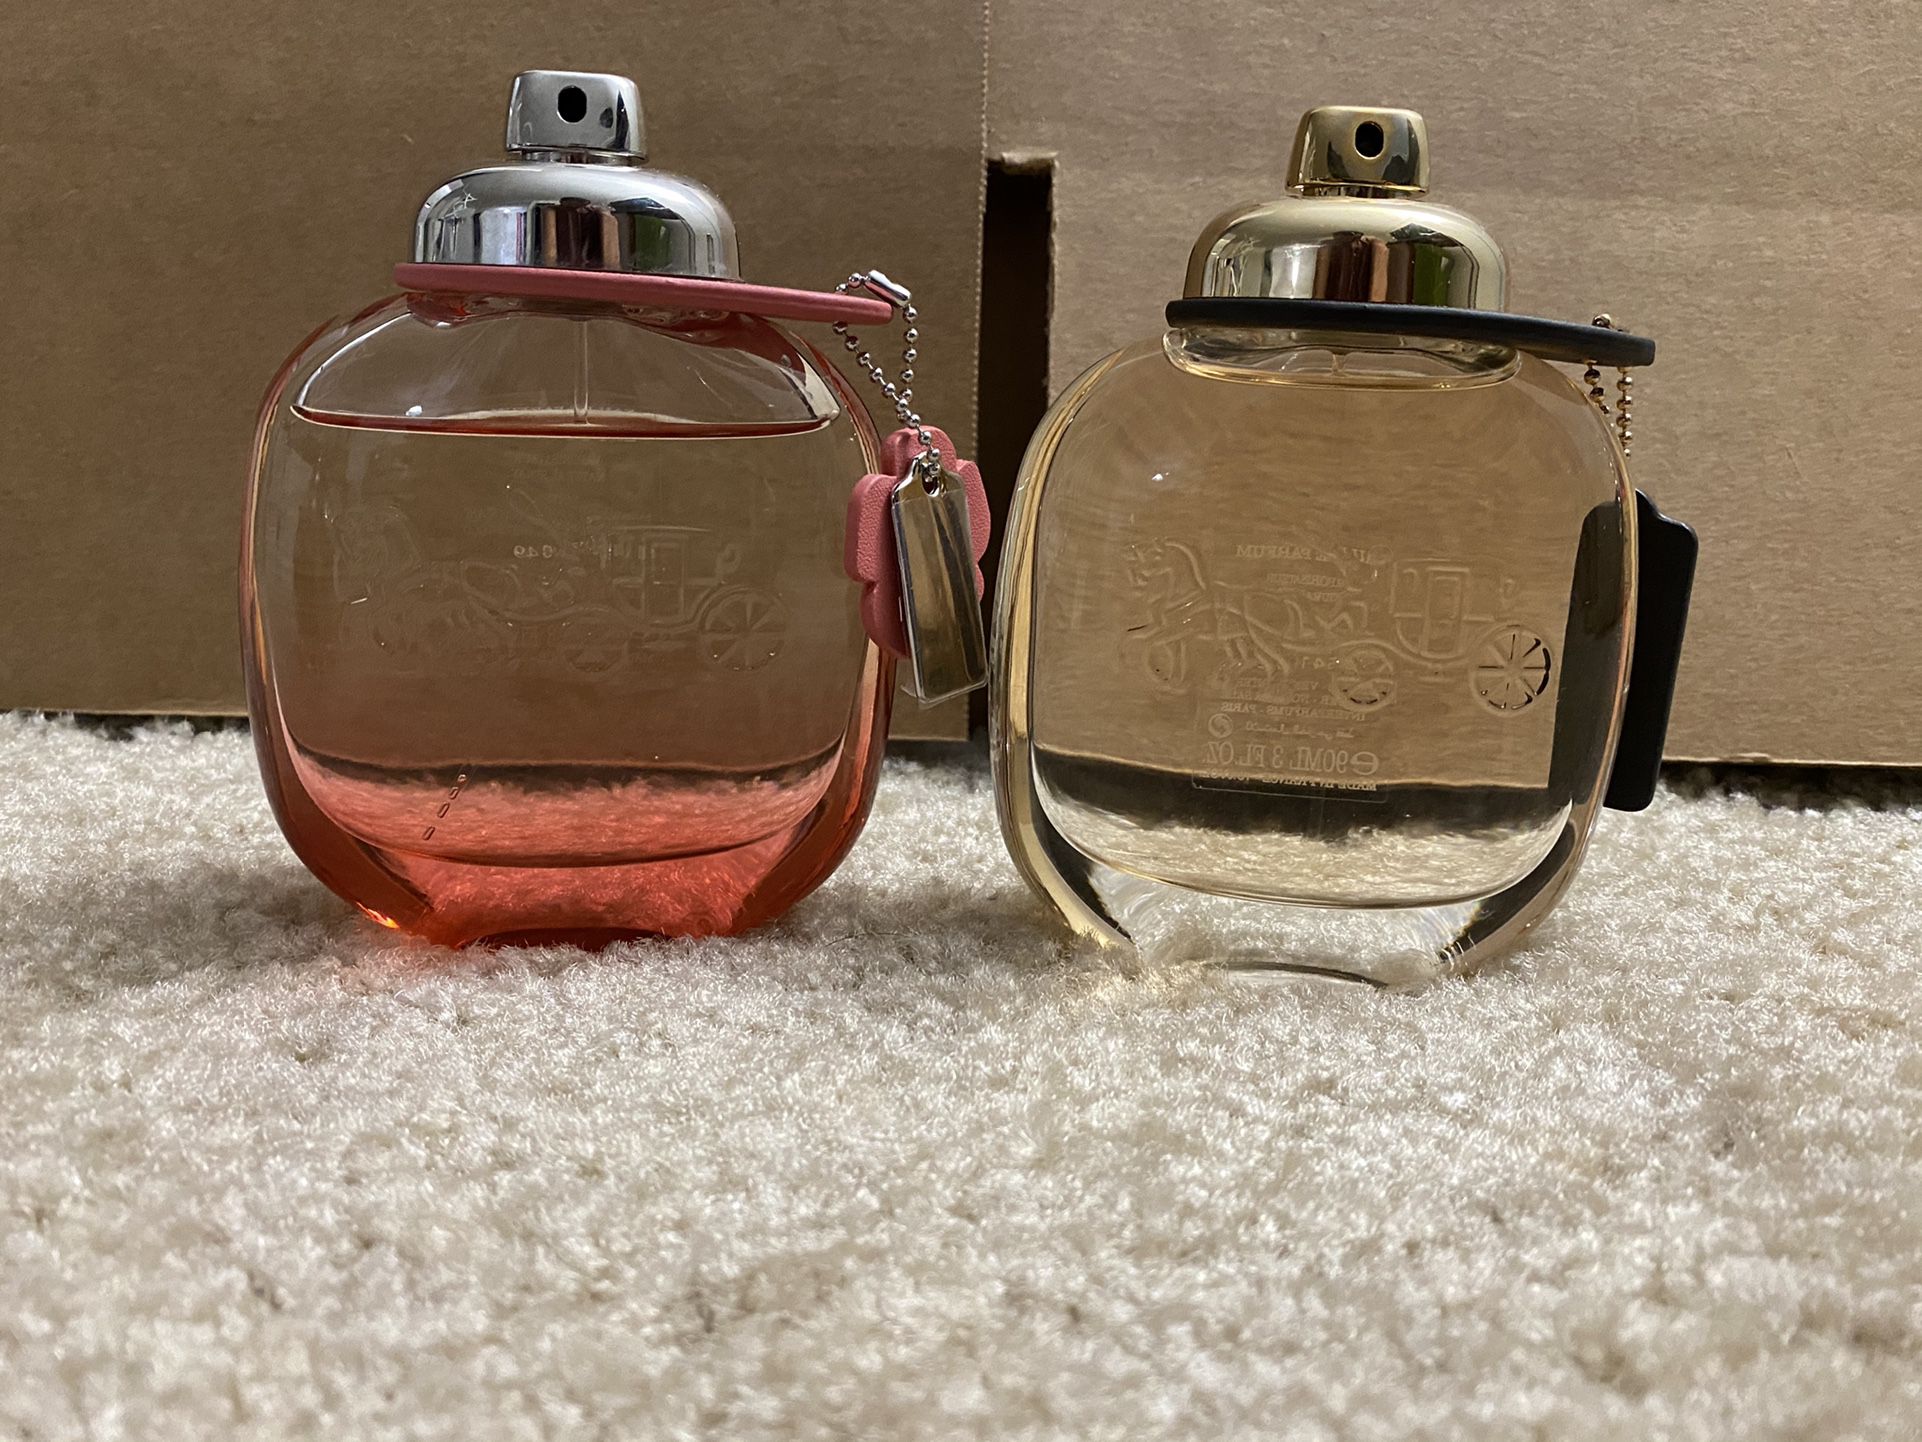 Coach Buy 2 For 120$